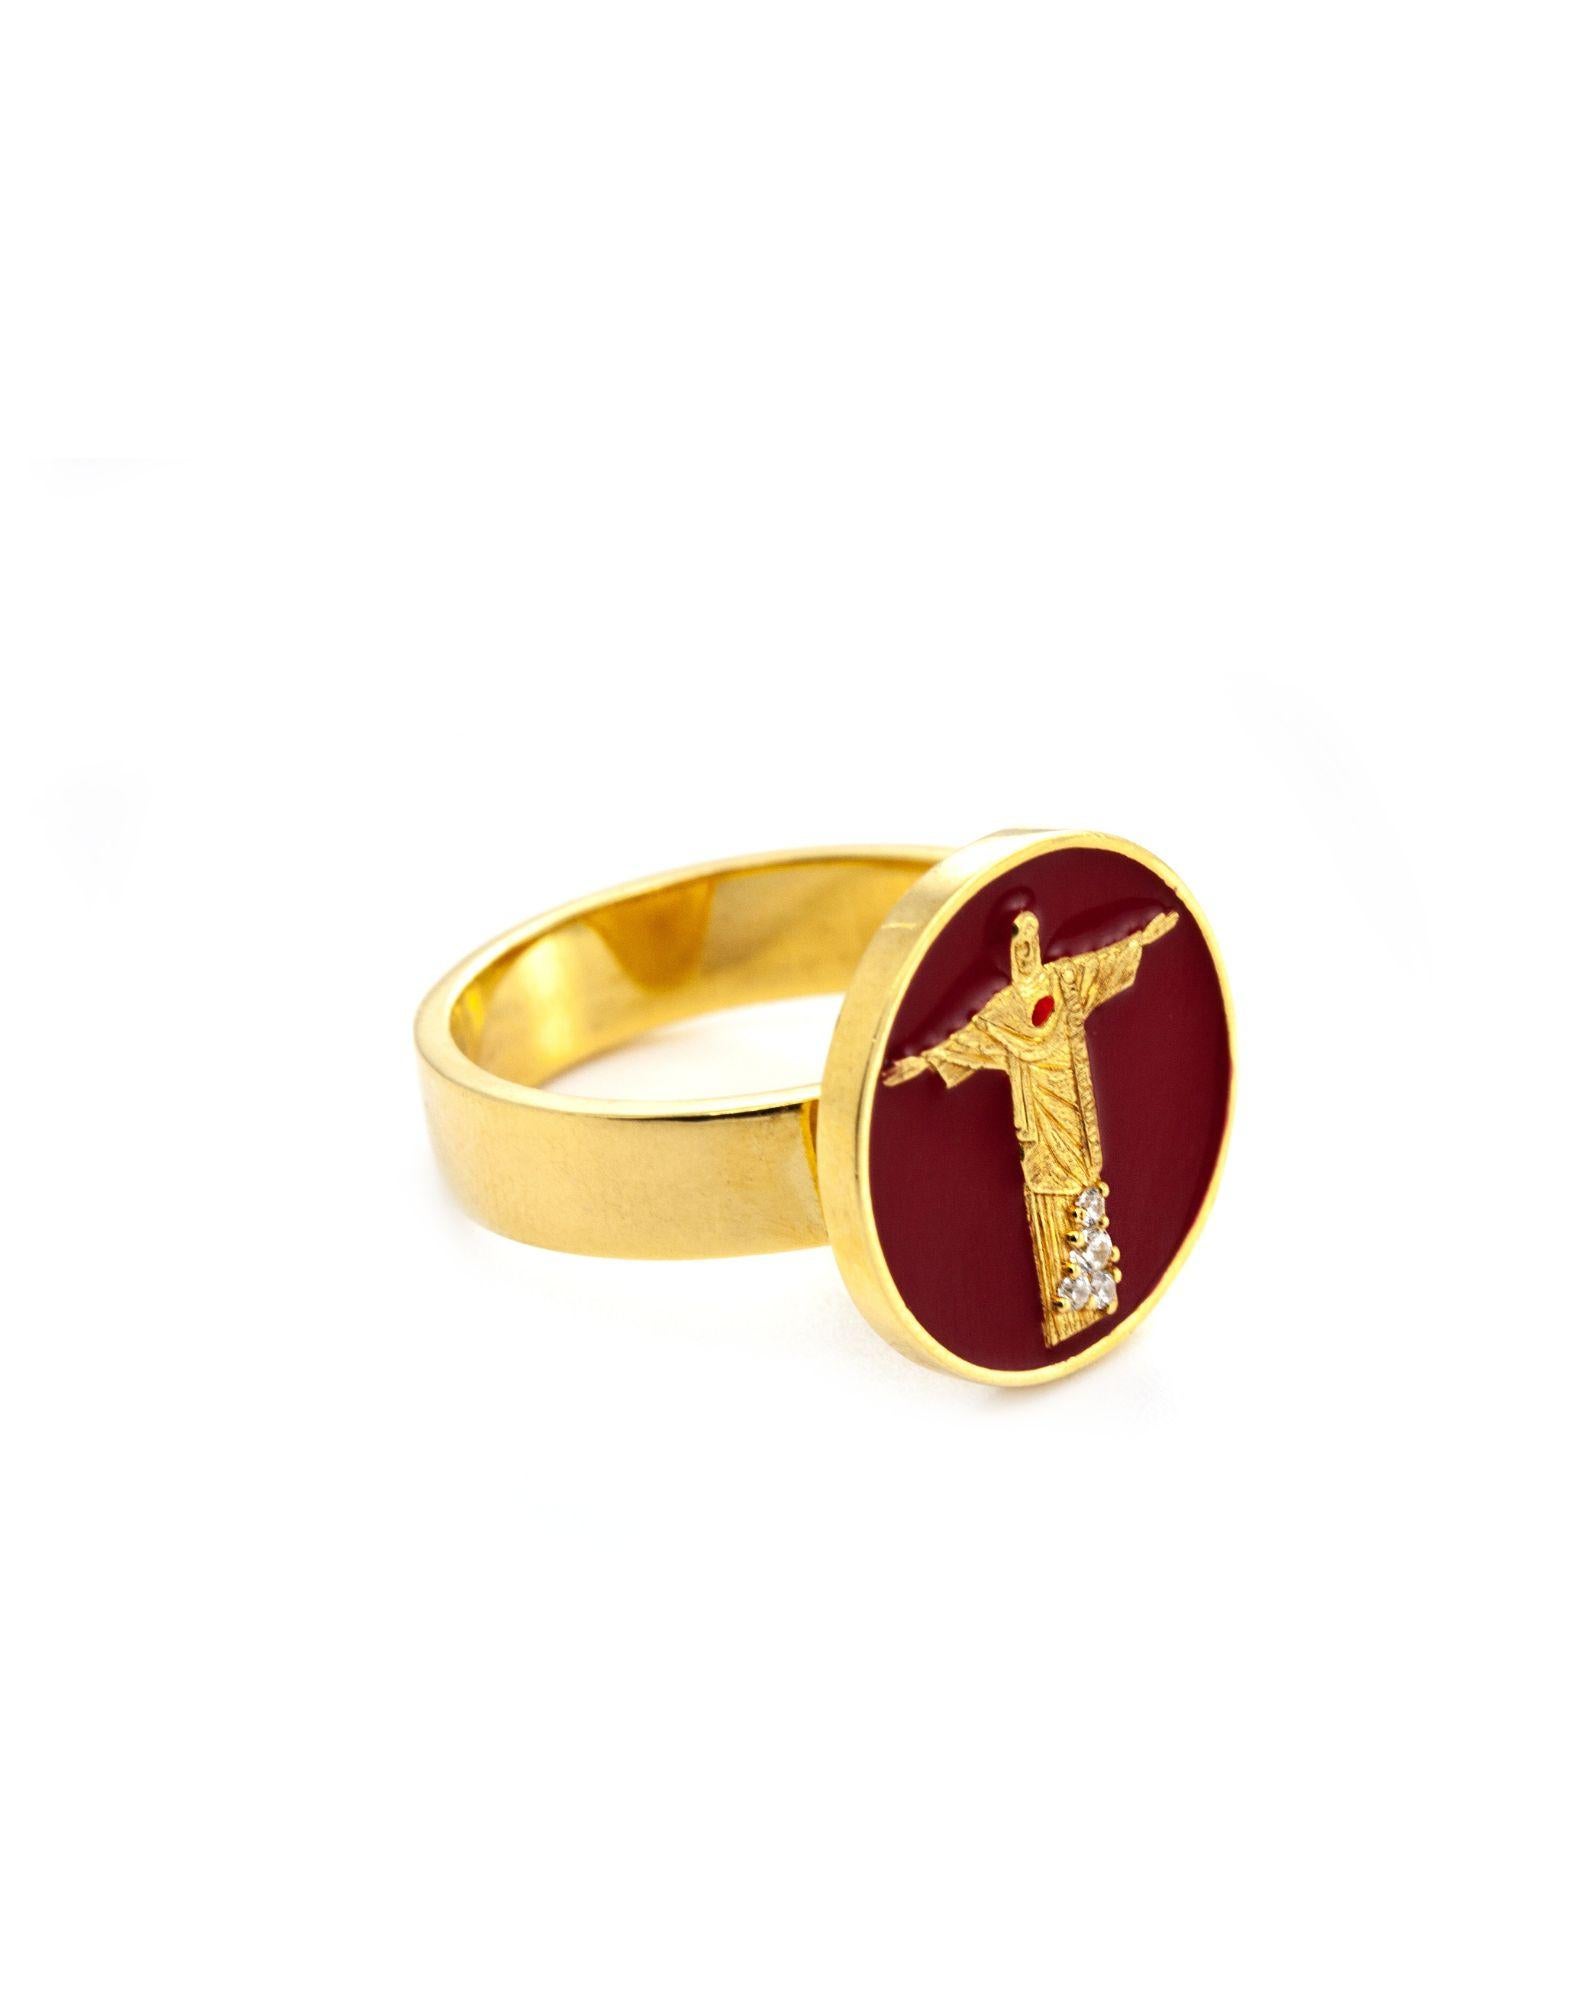 Corcovado ring in 925 gold-plated sterling silver, hand-enameled with red enamel.

Made n Italy
Warranty and Gift Box THAIS BERNARDES

Corcovado ring in 925 gold-plated sterling silver, hand-enameled with red enamel.

The Corcovado collection,